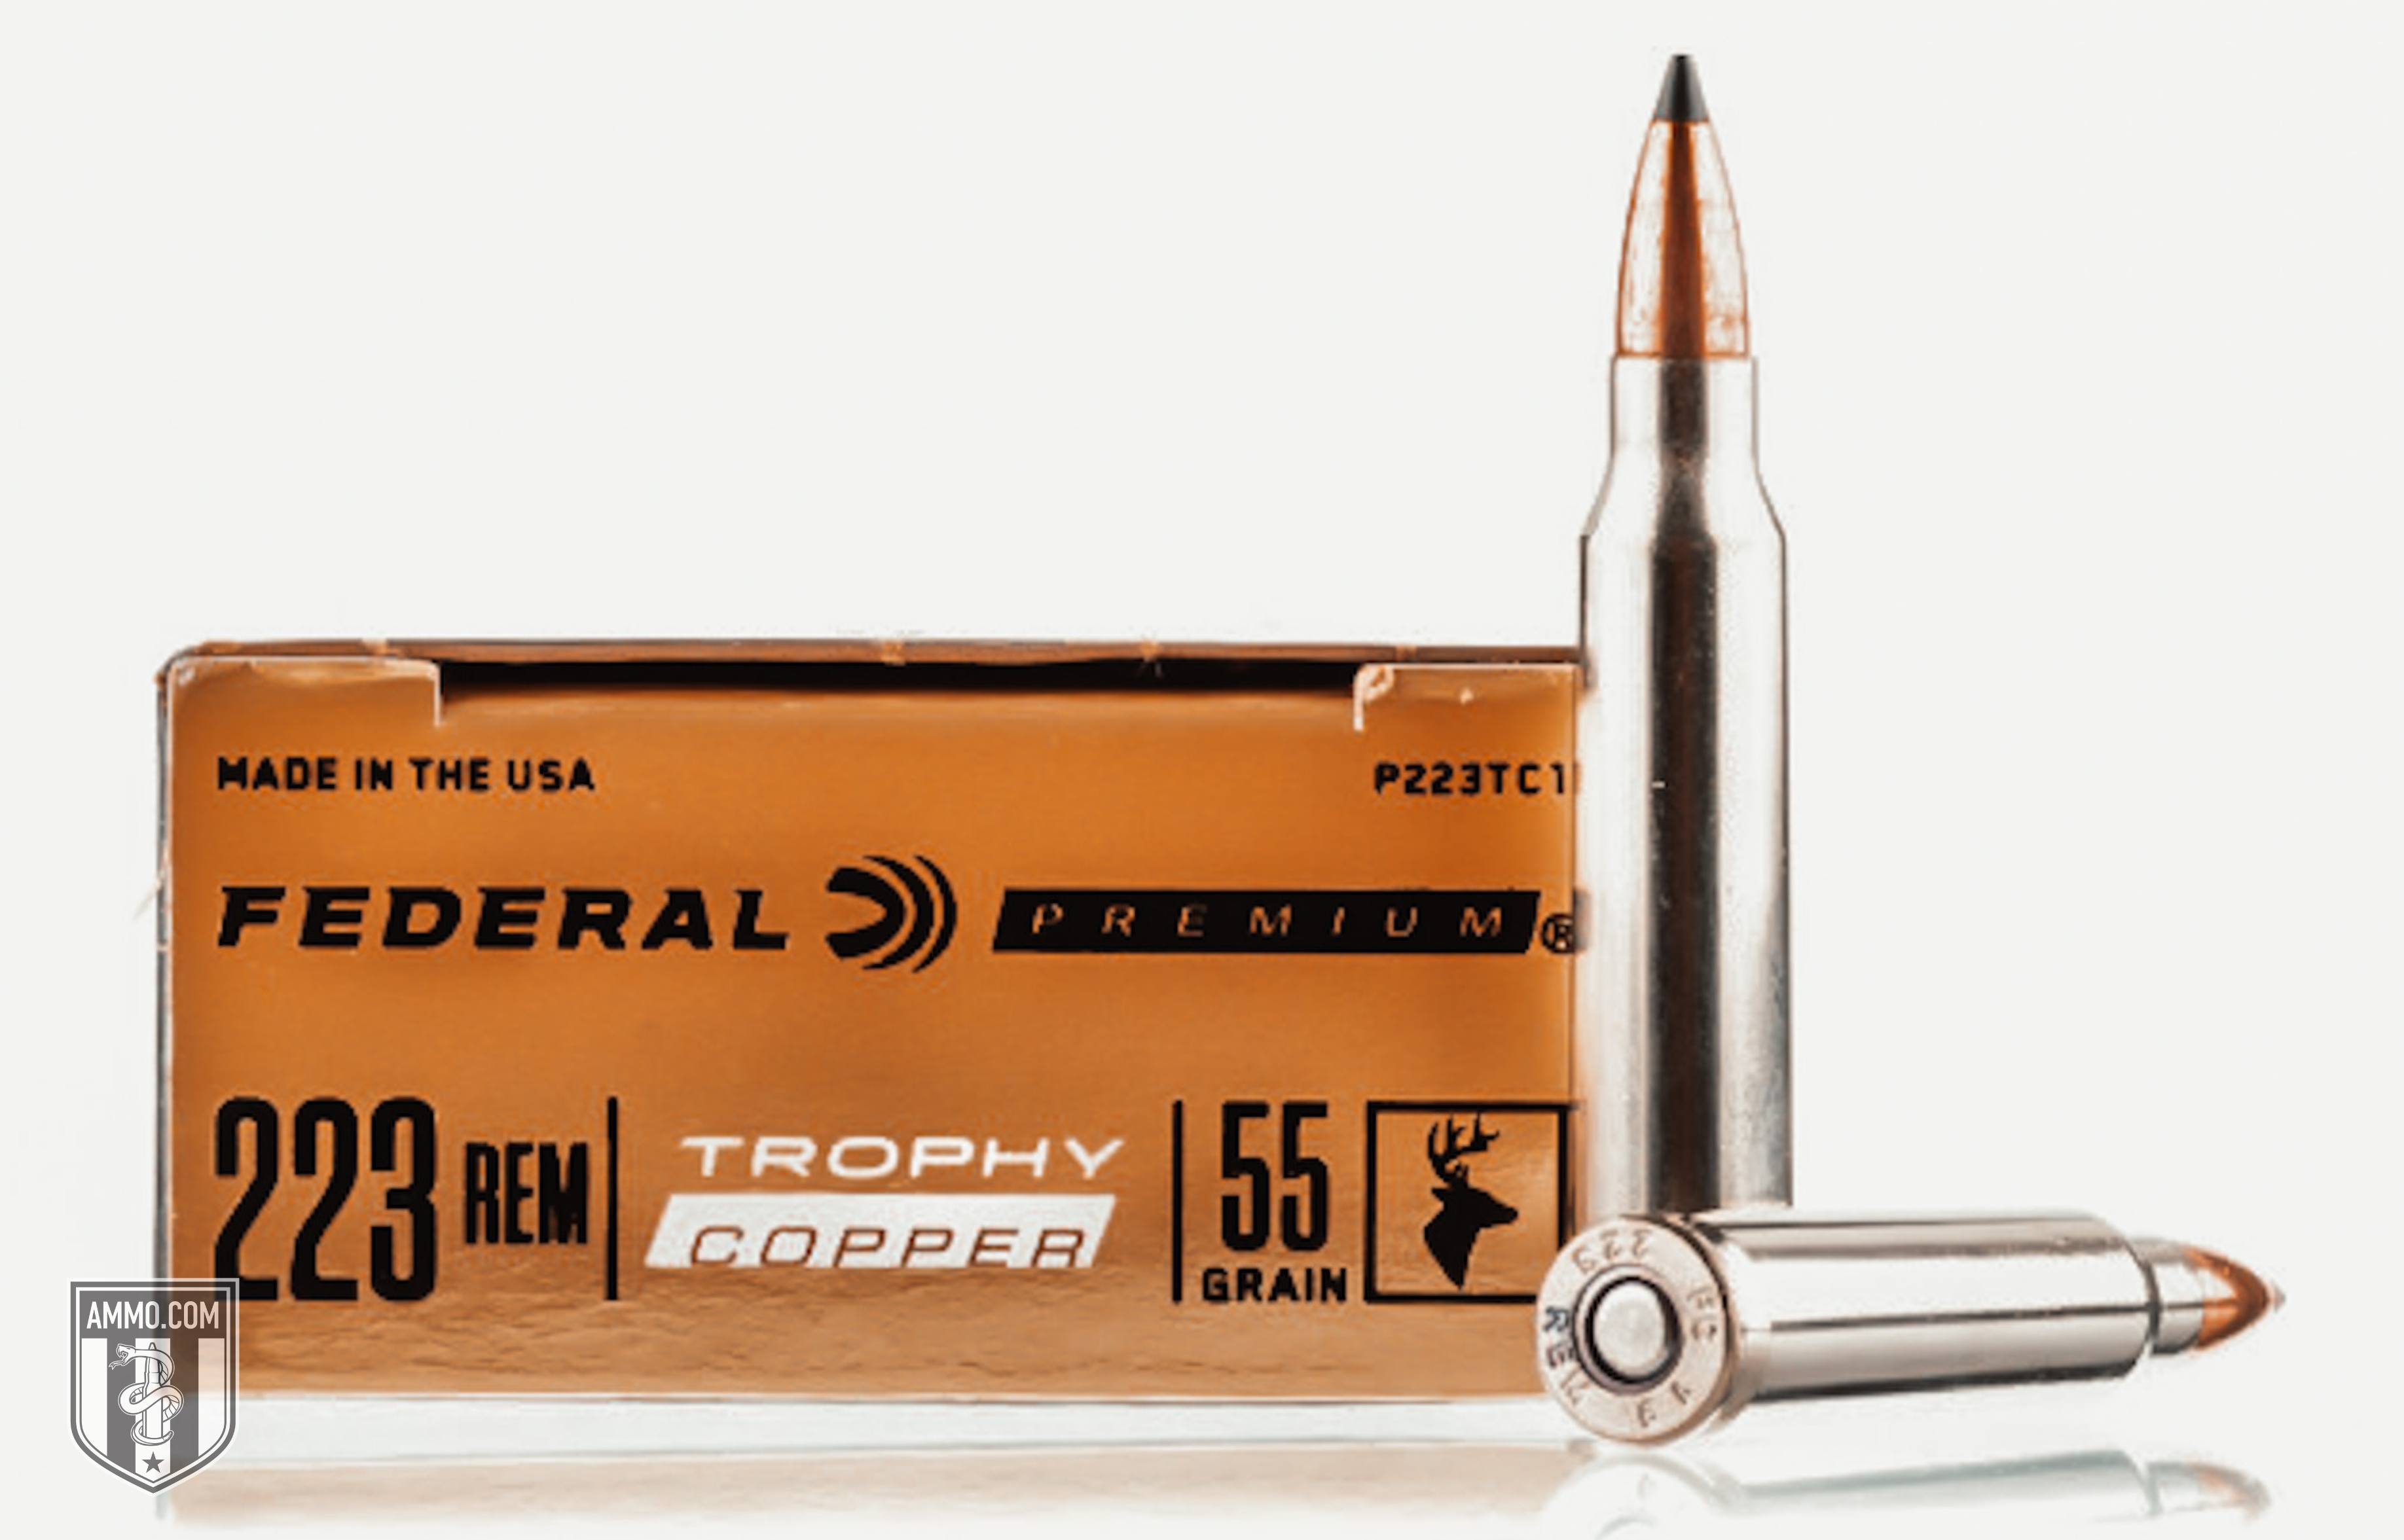 Federal 223 Rem Trophy Copper ammo for sale